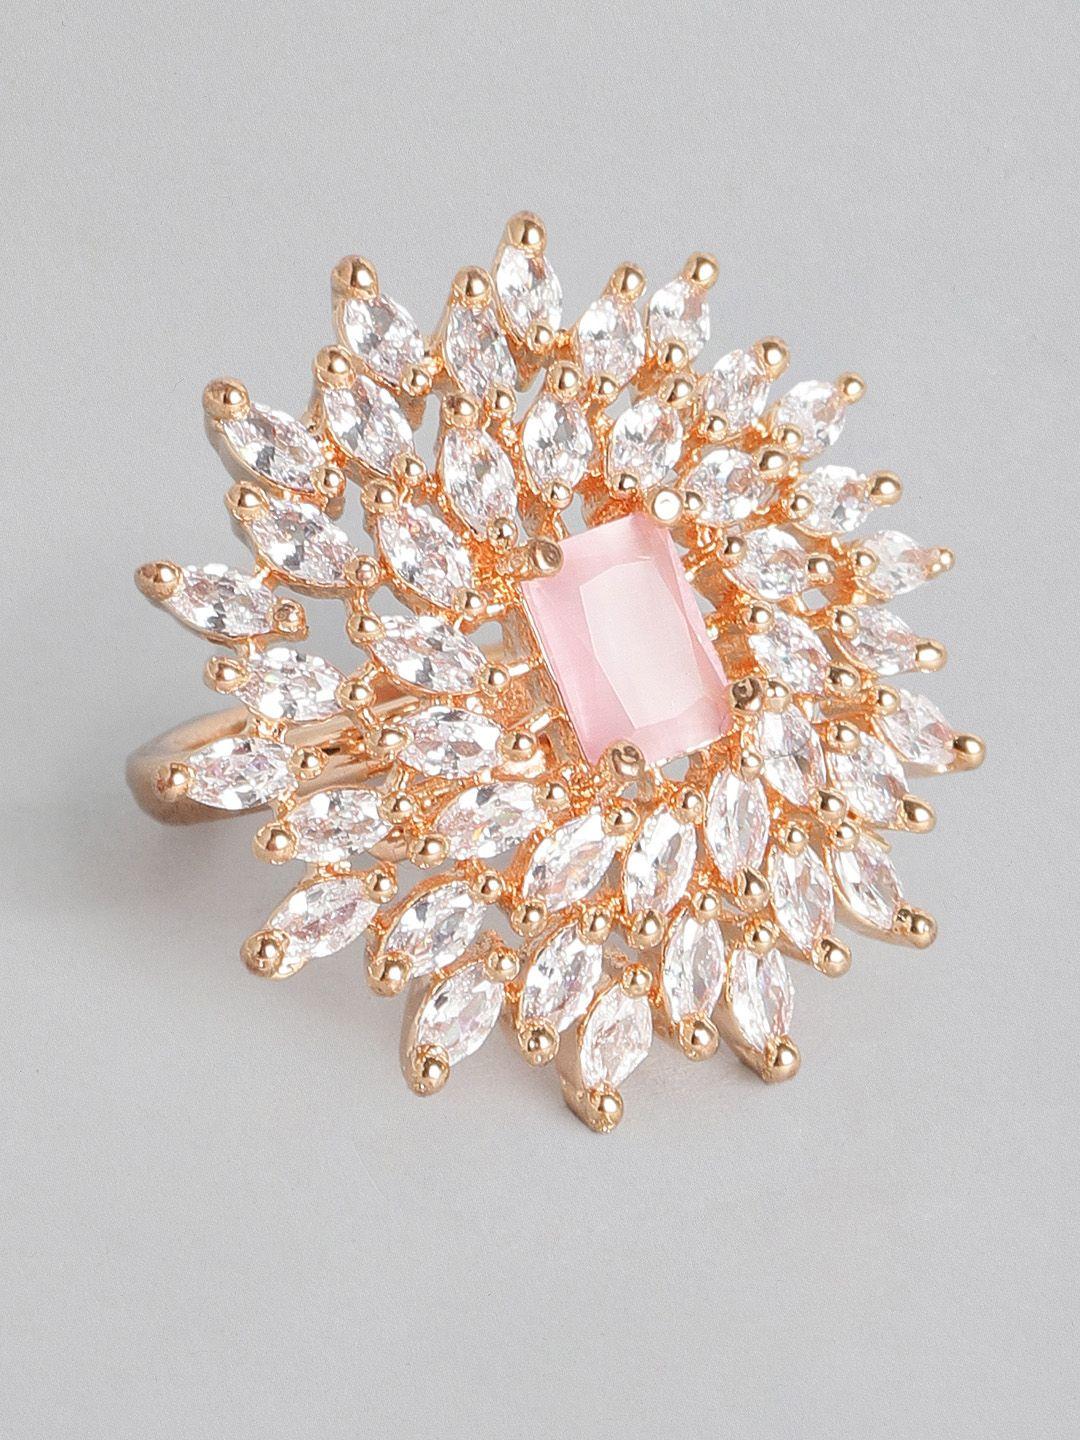 justpeachy pink rhodium-plated ad studded finger ring